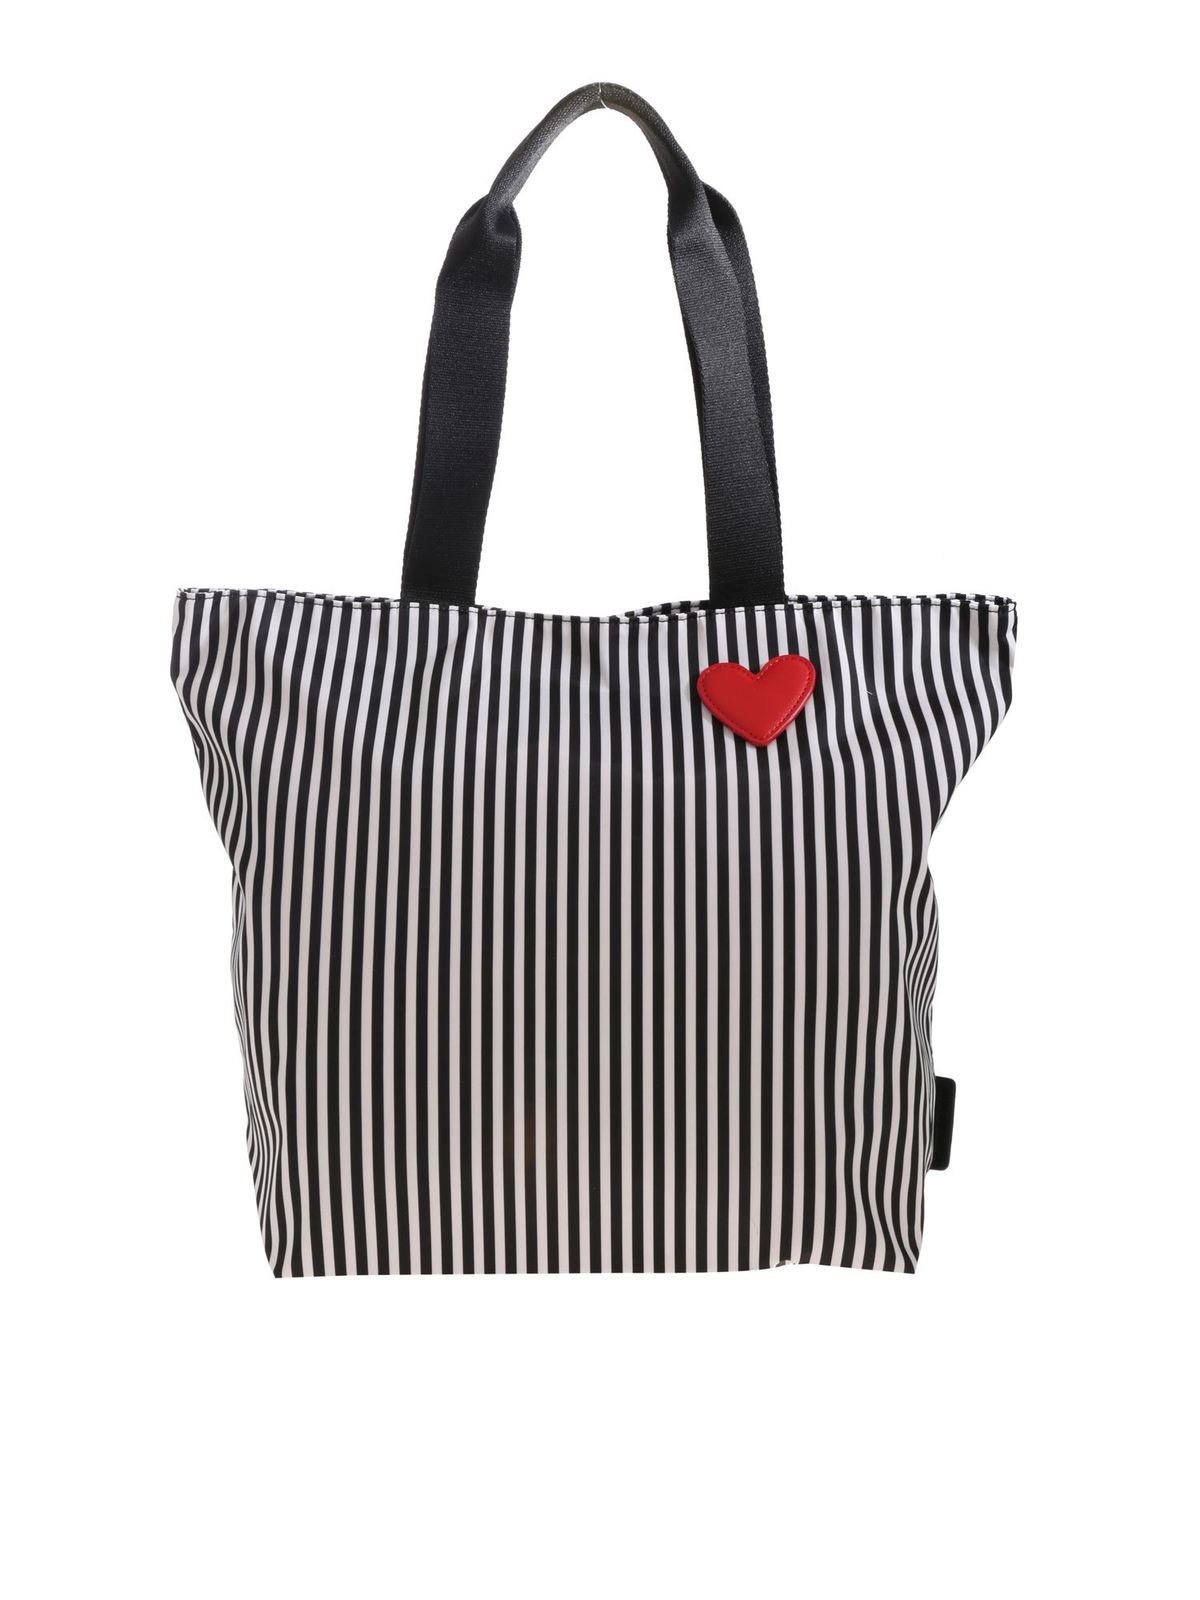 Totes bags Lulu Guinness - Bea tote bag in black and white ...